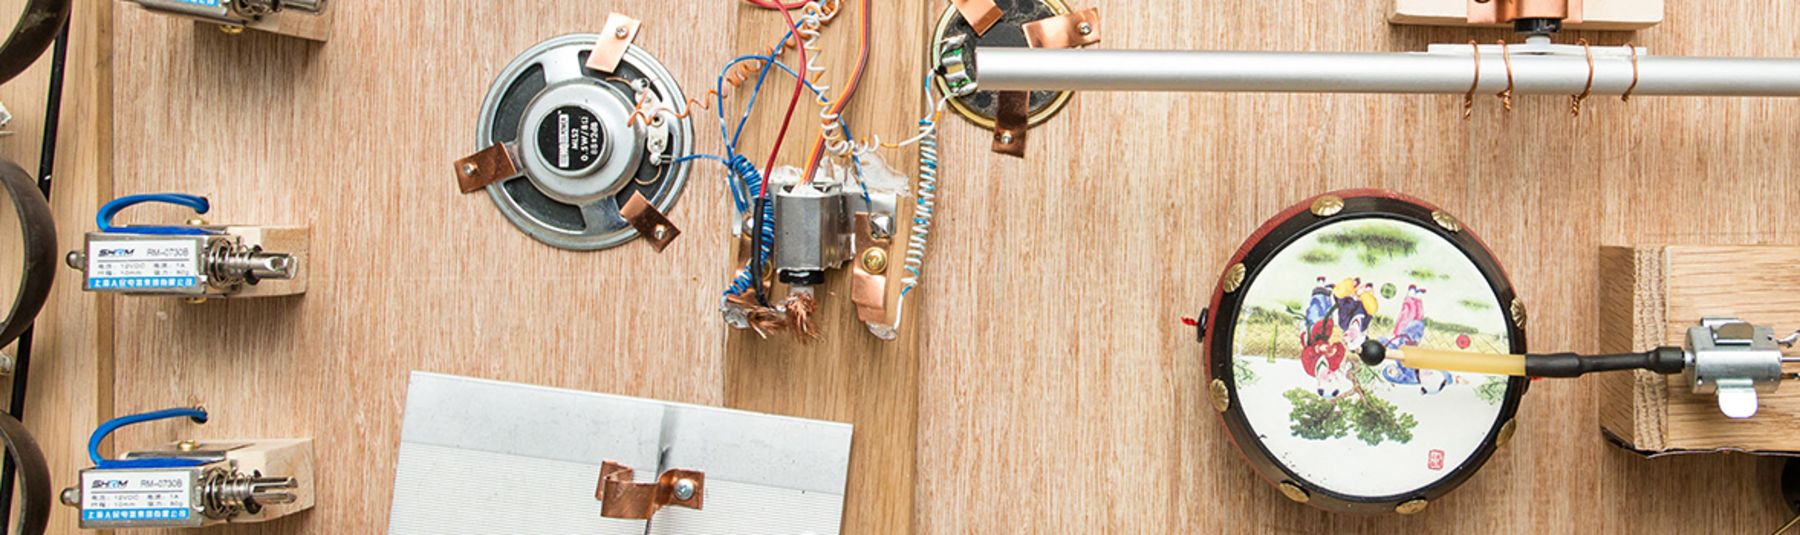 electronics, speaker heads and wires on a wooden board